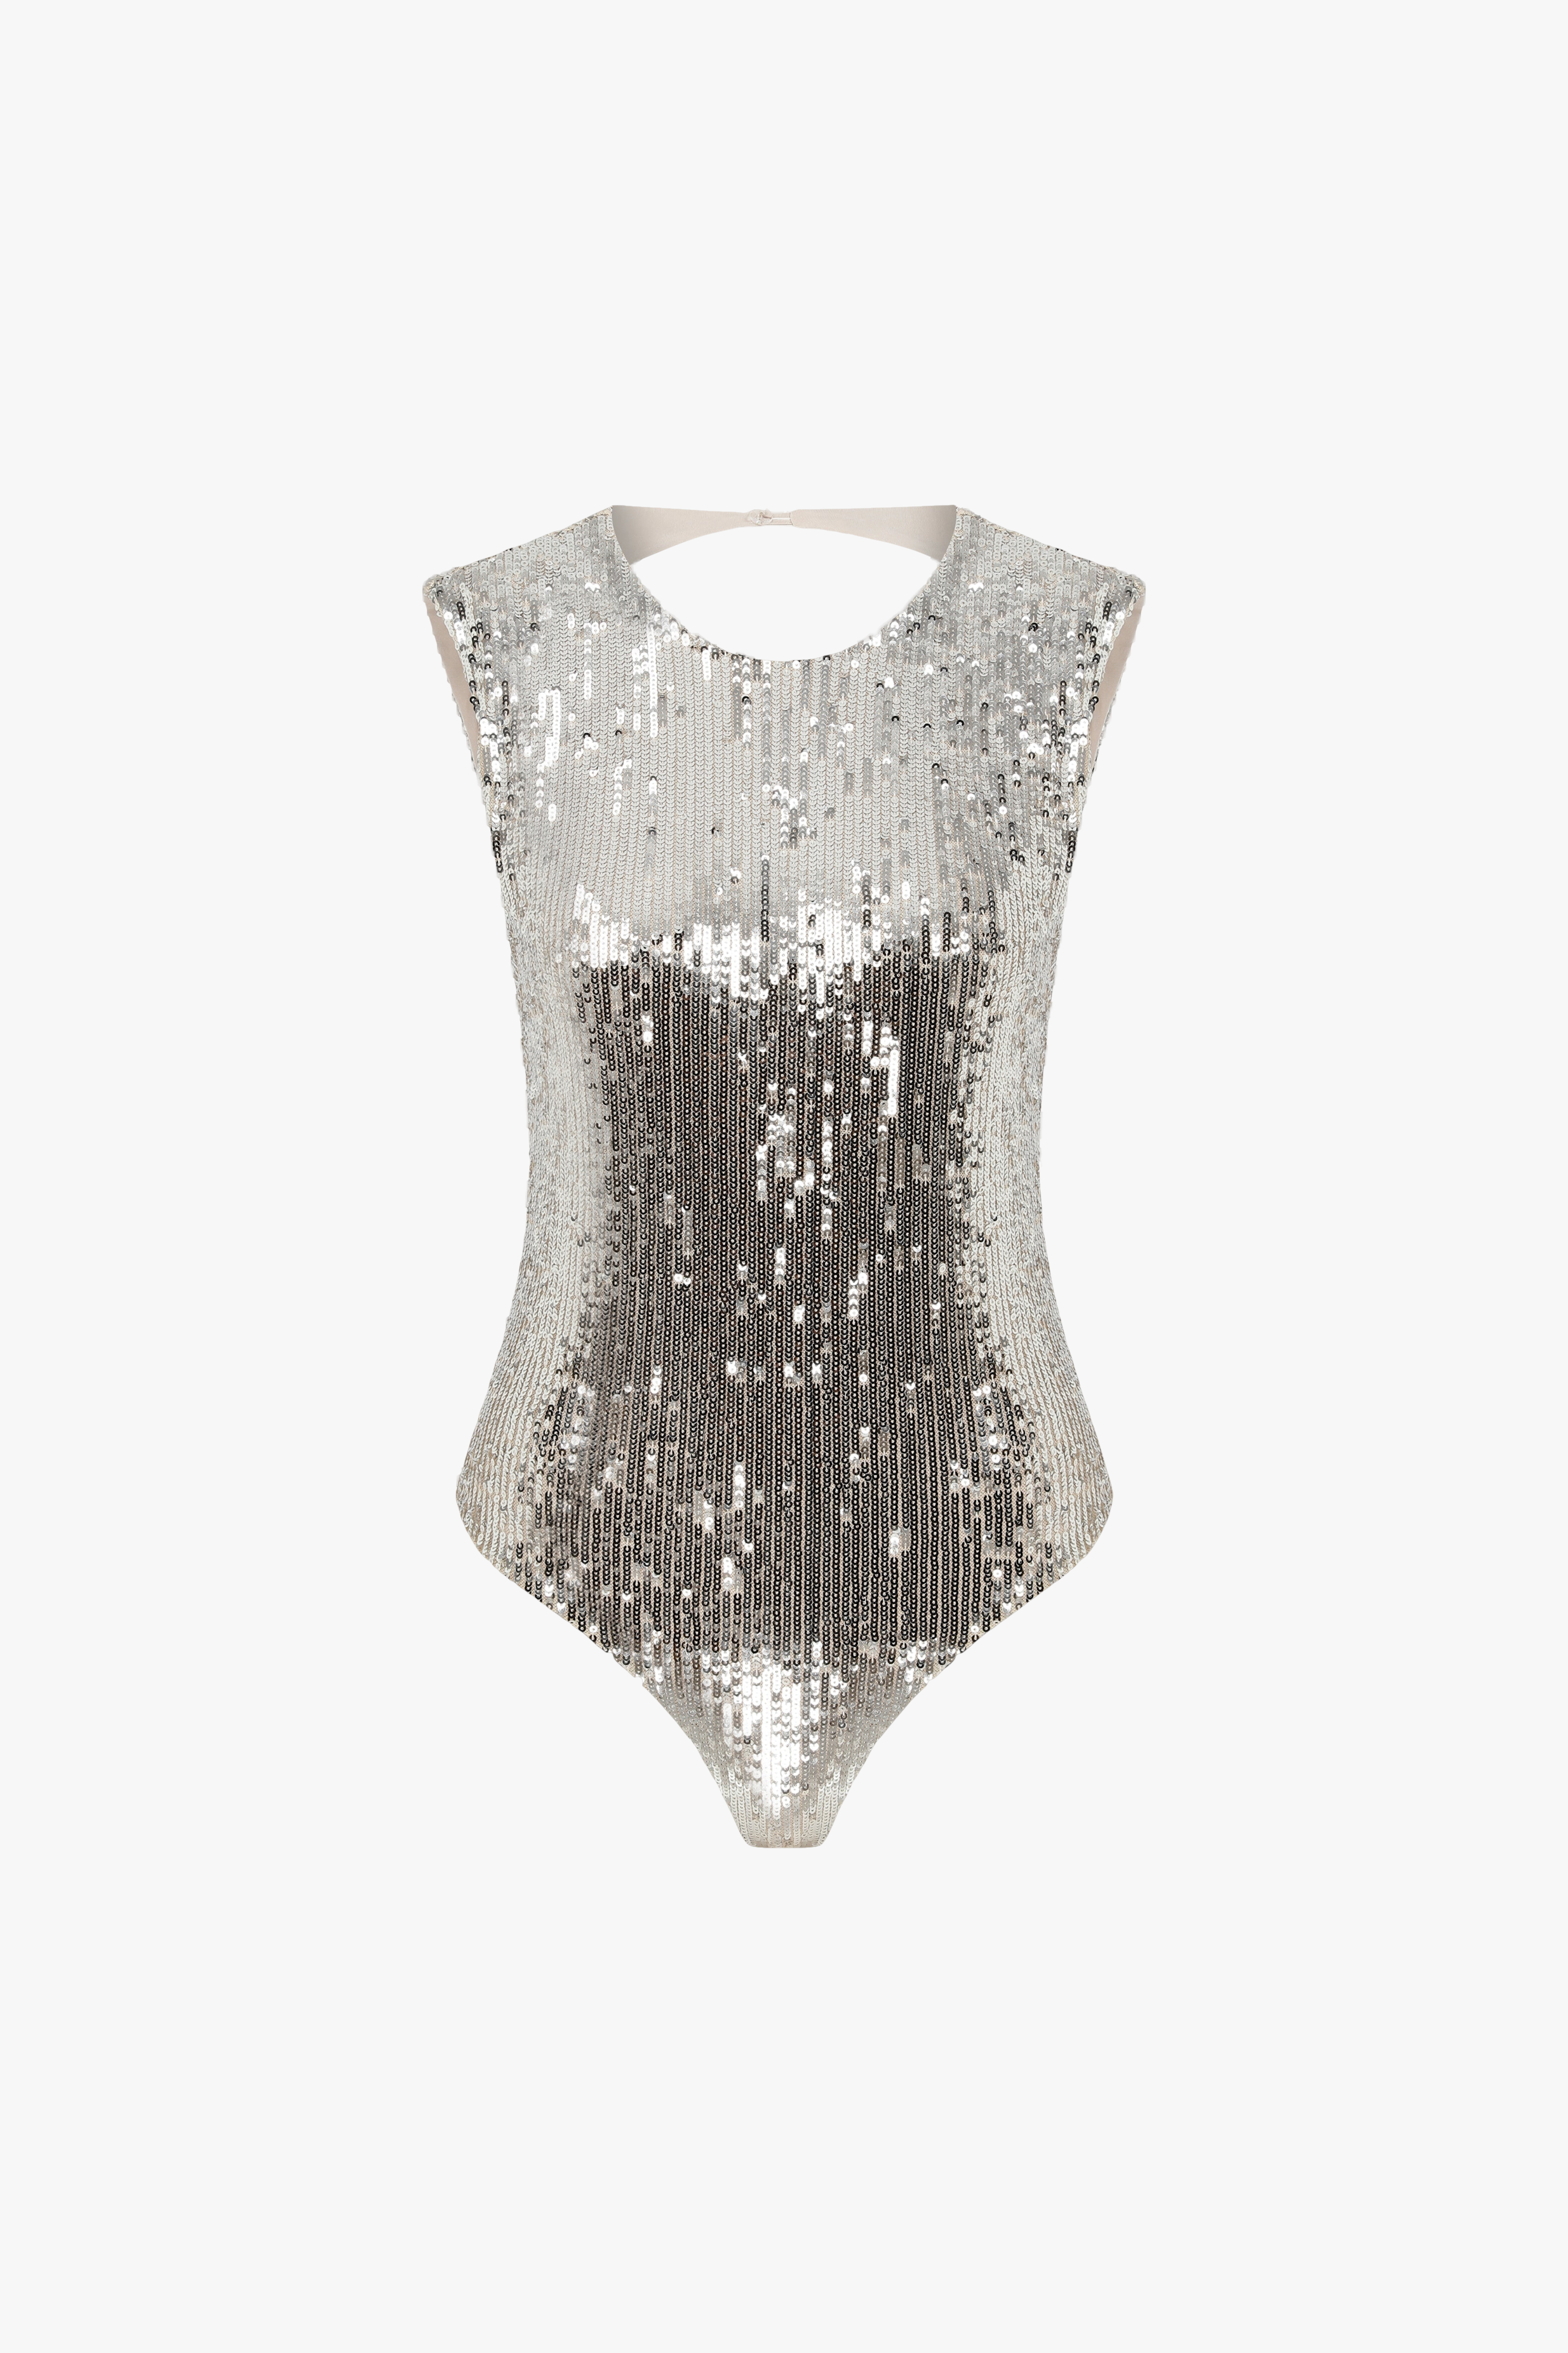 Silver, Sparkly, Sequin Bodysuit for Women. This Sequin Leotard is